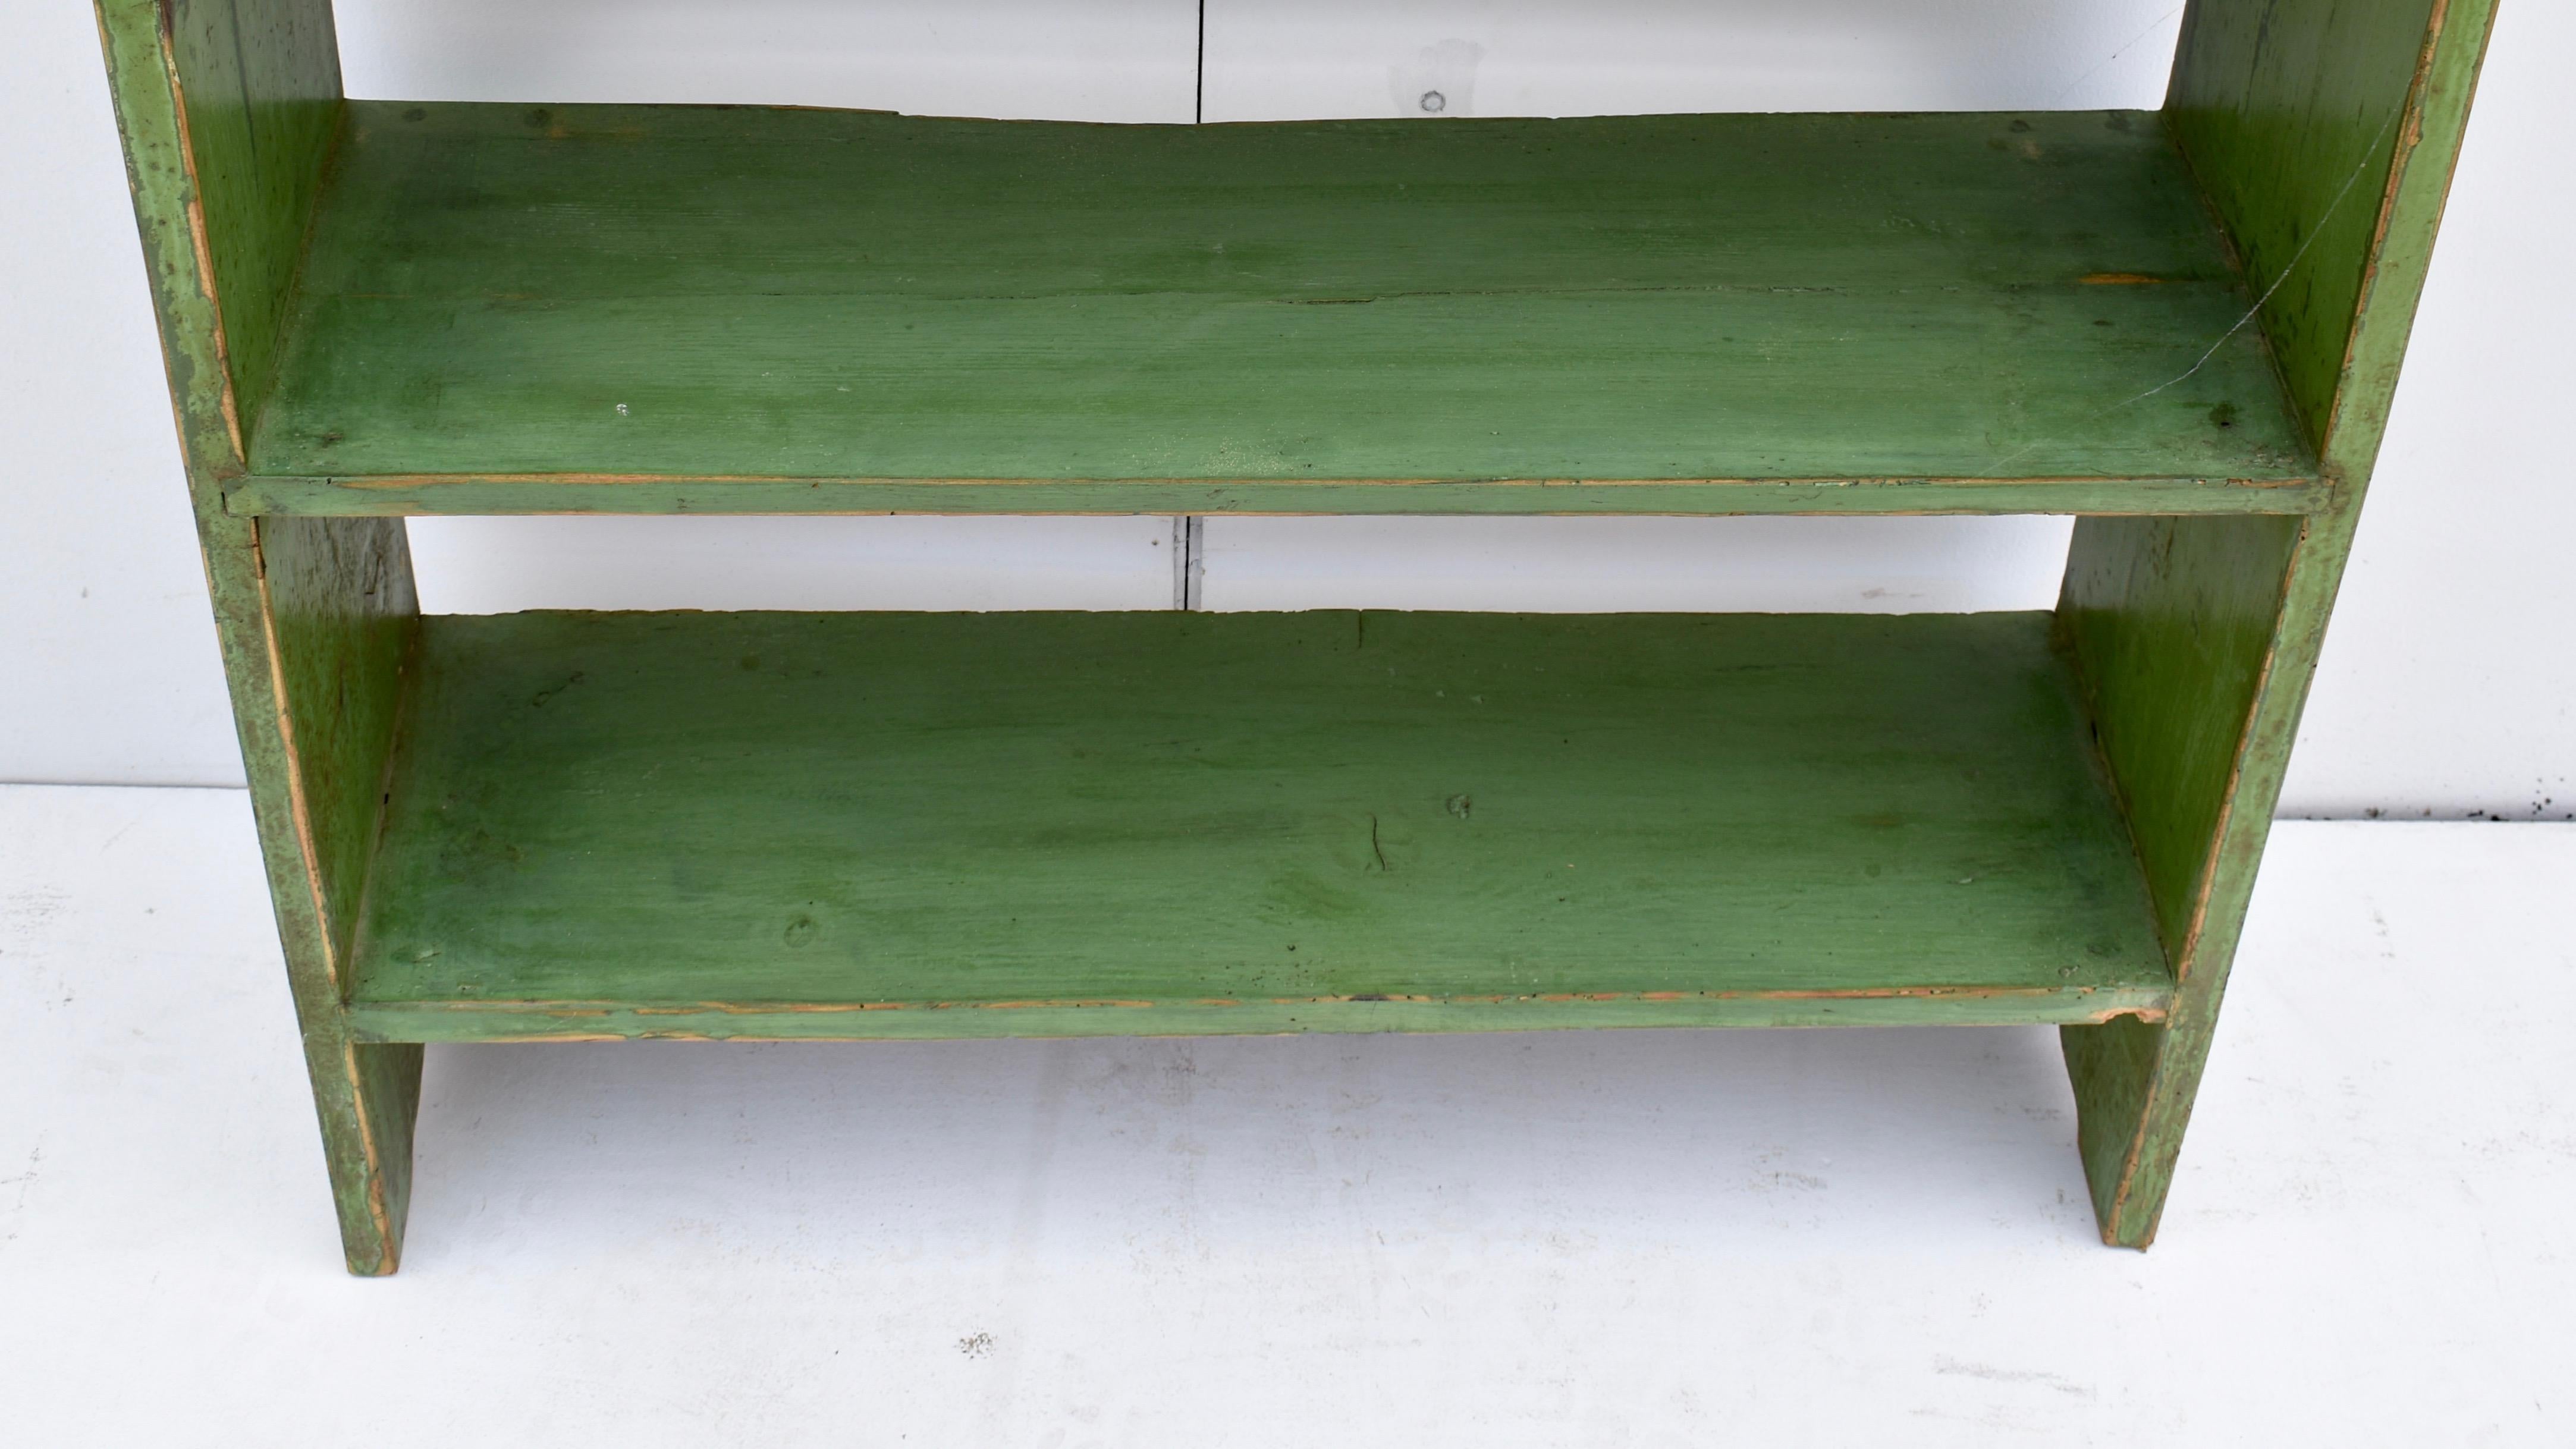 20th Century Painted Pine Bookshelves or Etagere